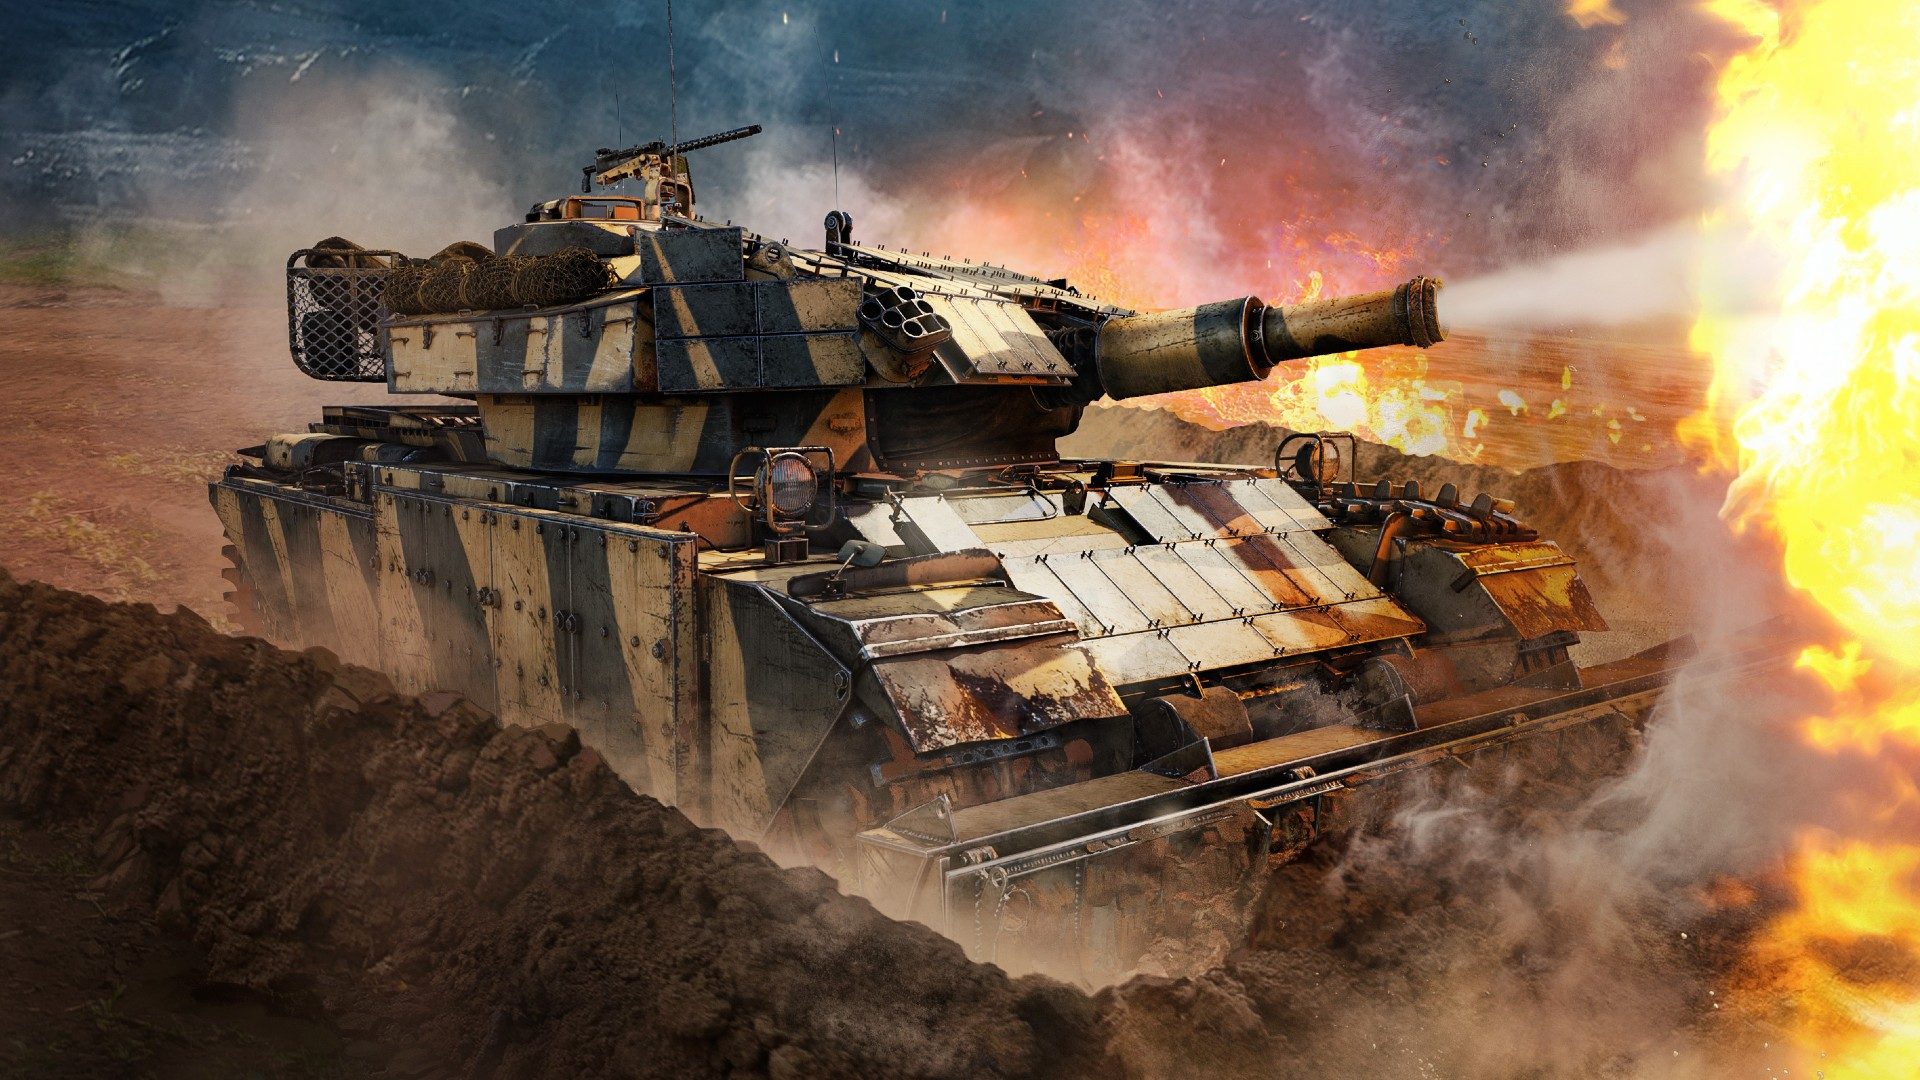 War Thunder’s Ground Breaking update brings a huge new season of content